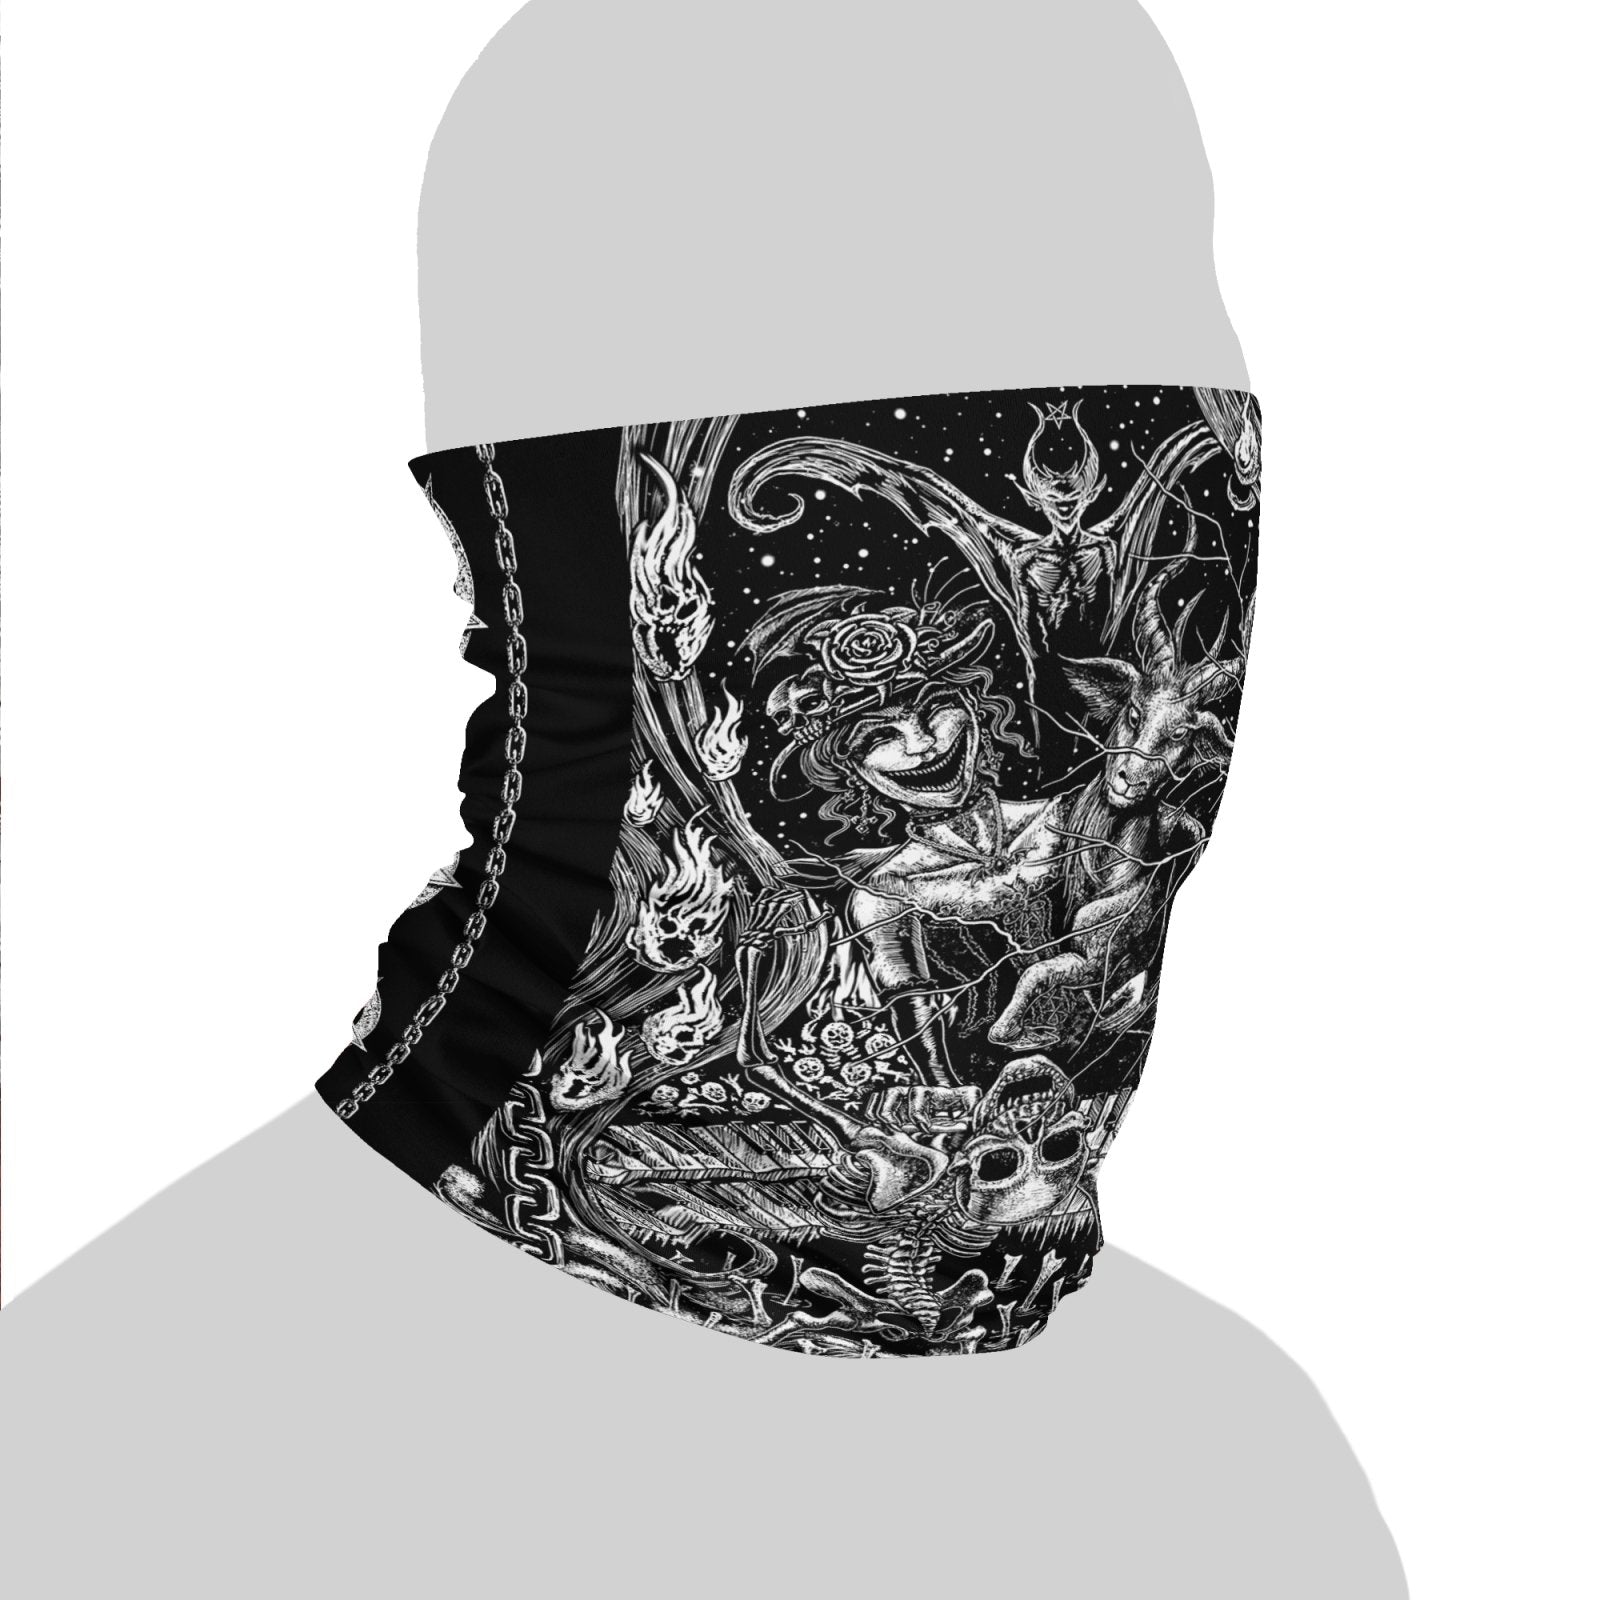 Gothic Neck Gaiter, Face Mask, Head Covering, Satanic, Goth Hell, Street Outfit - Merry - Abysm Internal